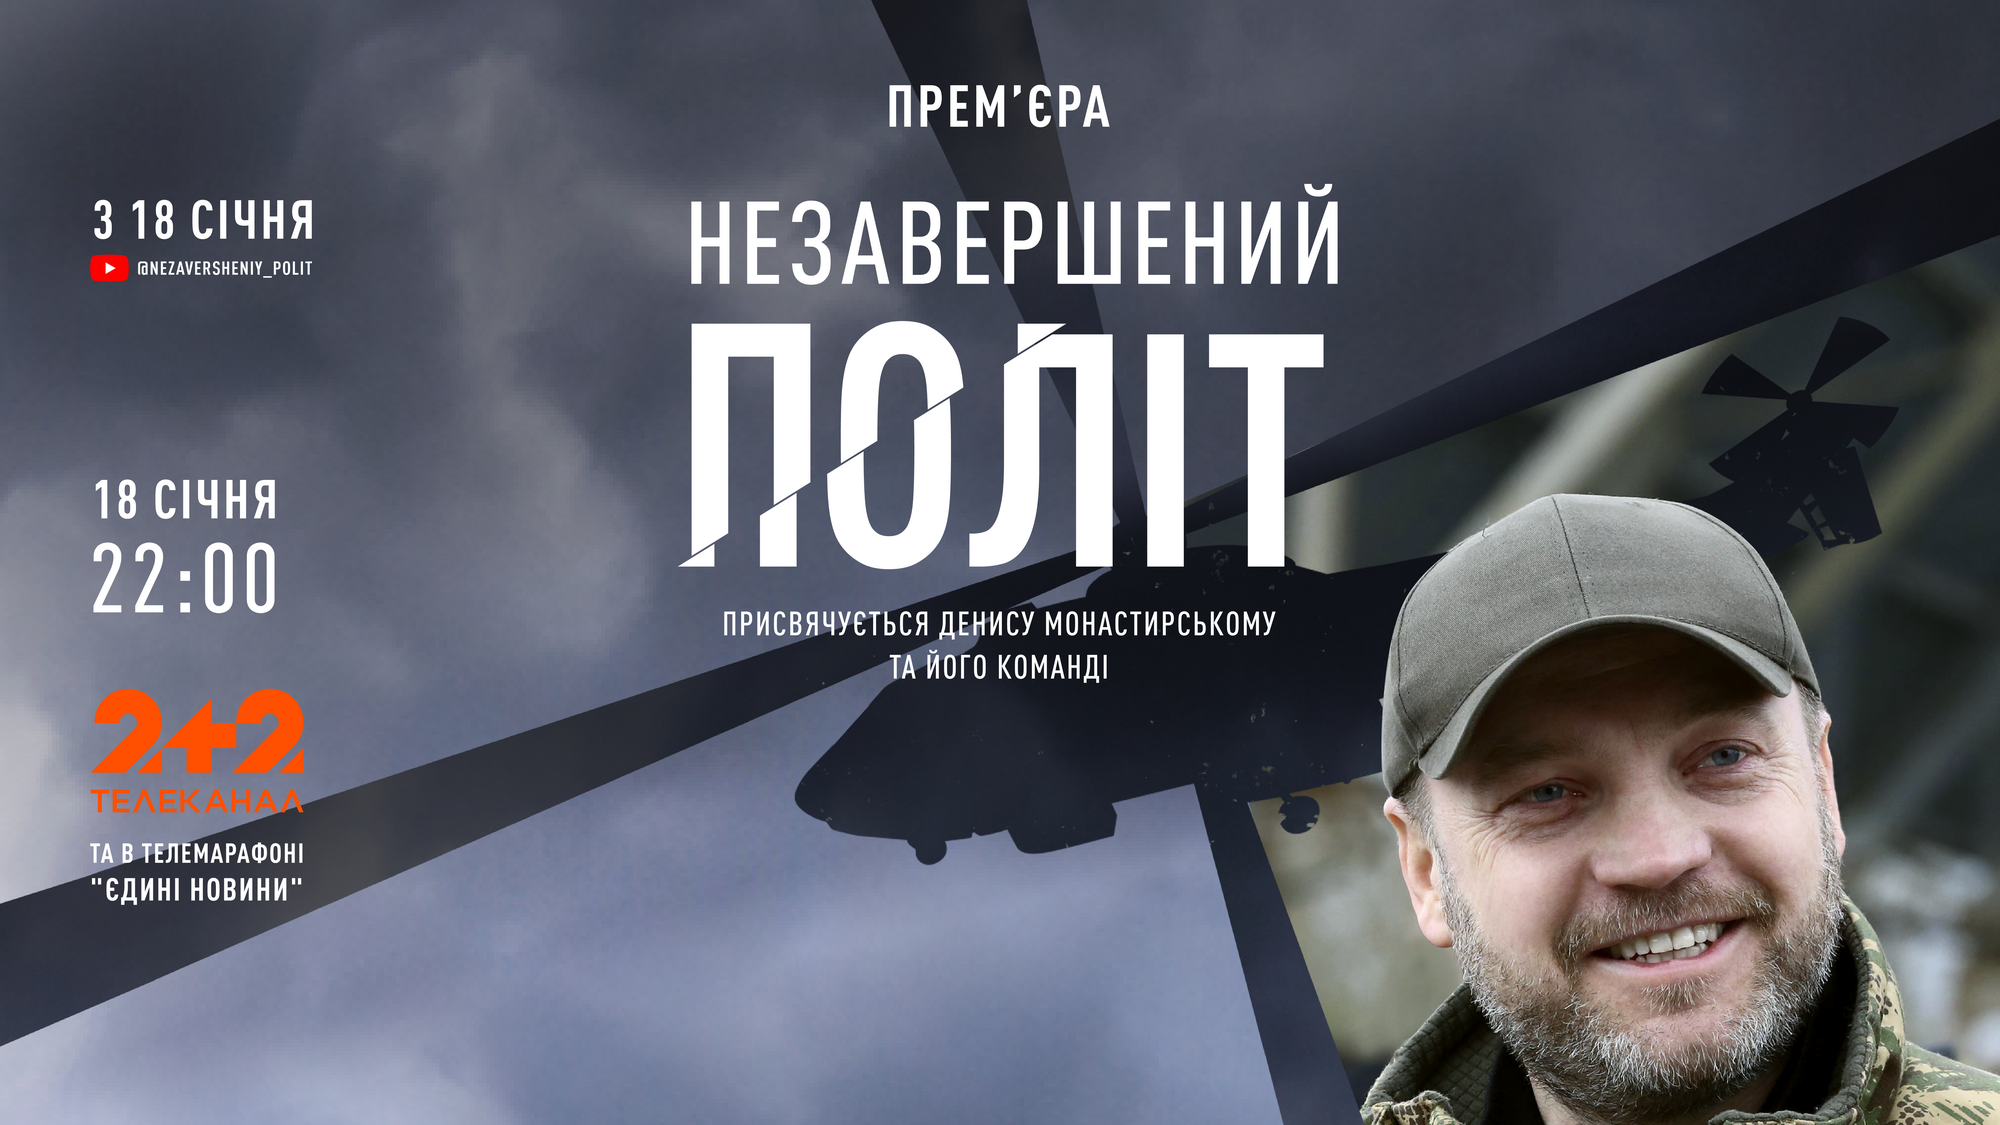 A documentary project about Denys Monastyrsky ''Unfinished Flight'' has been published